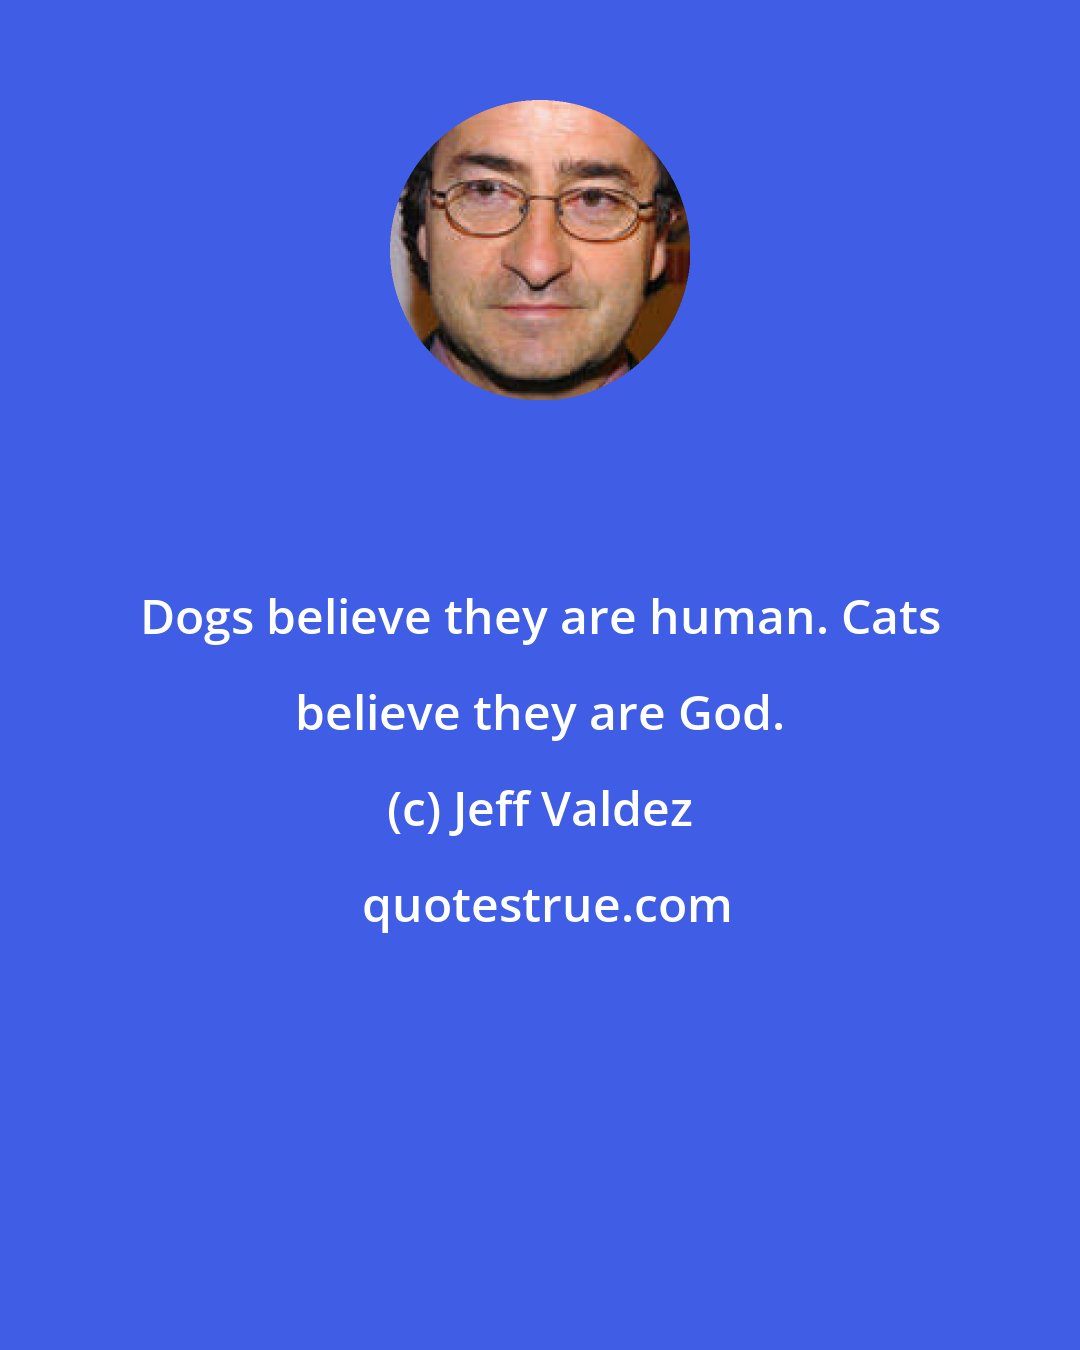 Jeff Valdez: Dogs believe they are human. Cats believe they are God.